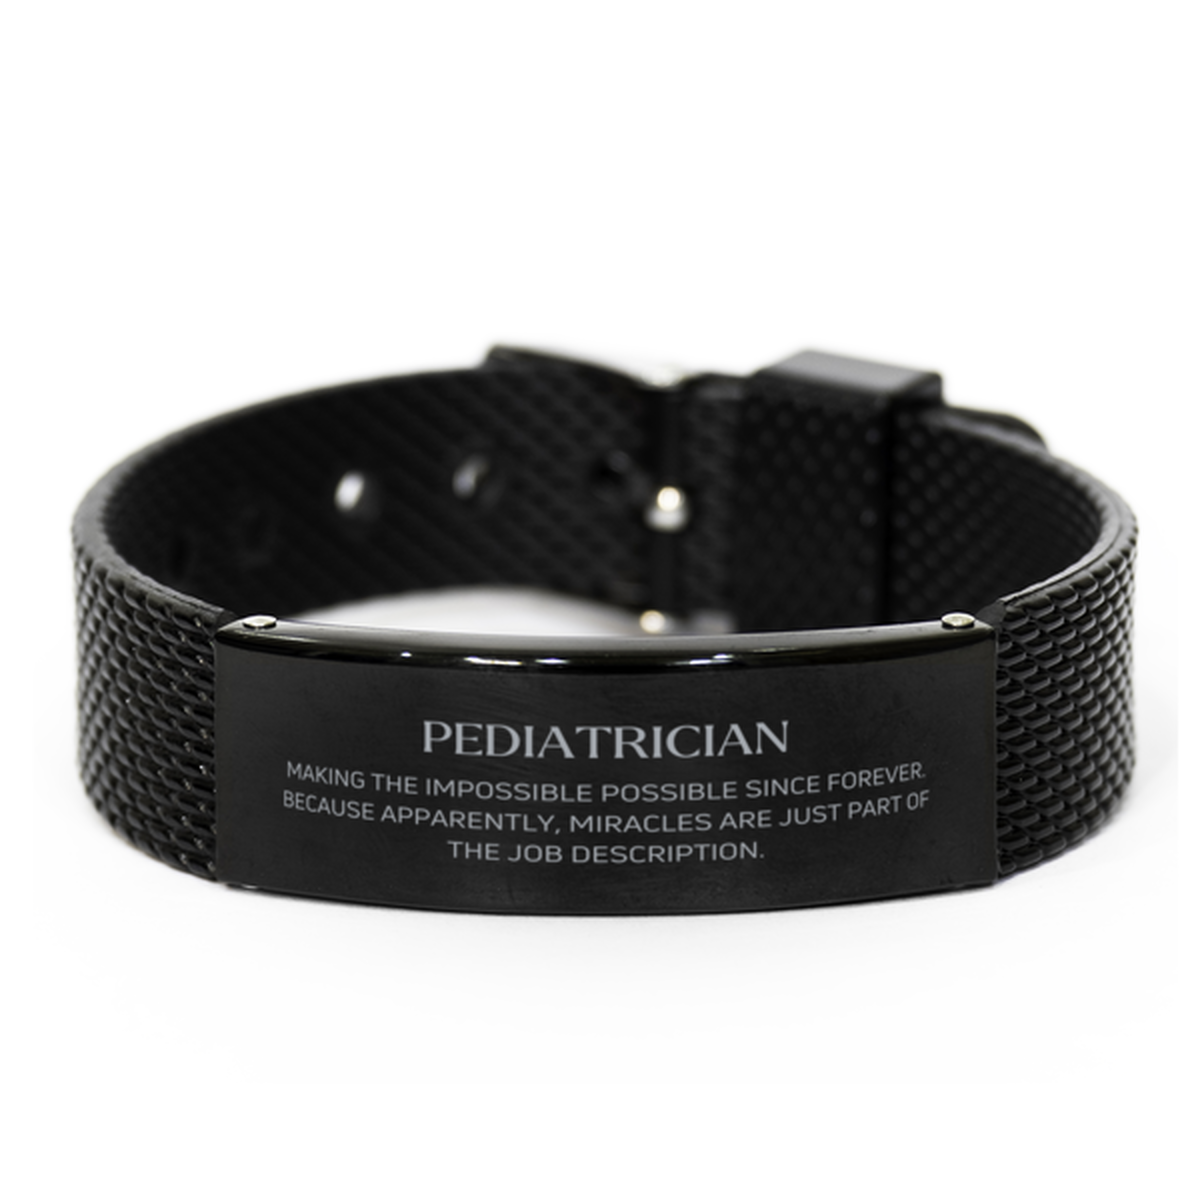 Funny Pediatrician Gifts, Miracles are just part of the job description, Inspirational Birthday Black Shark Mesh Bracelet For Pediatrician, Men, Women, Coworkers, Friends, Boss